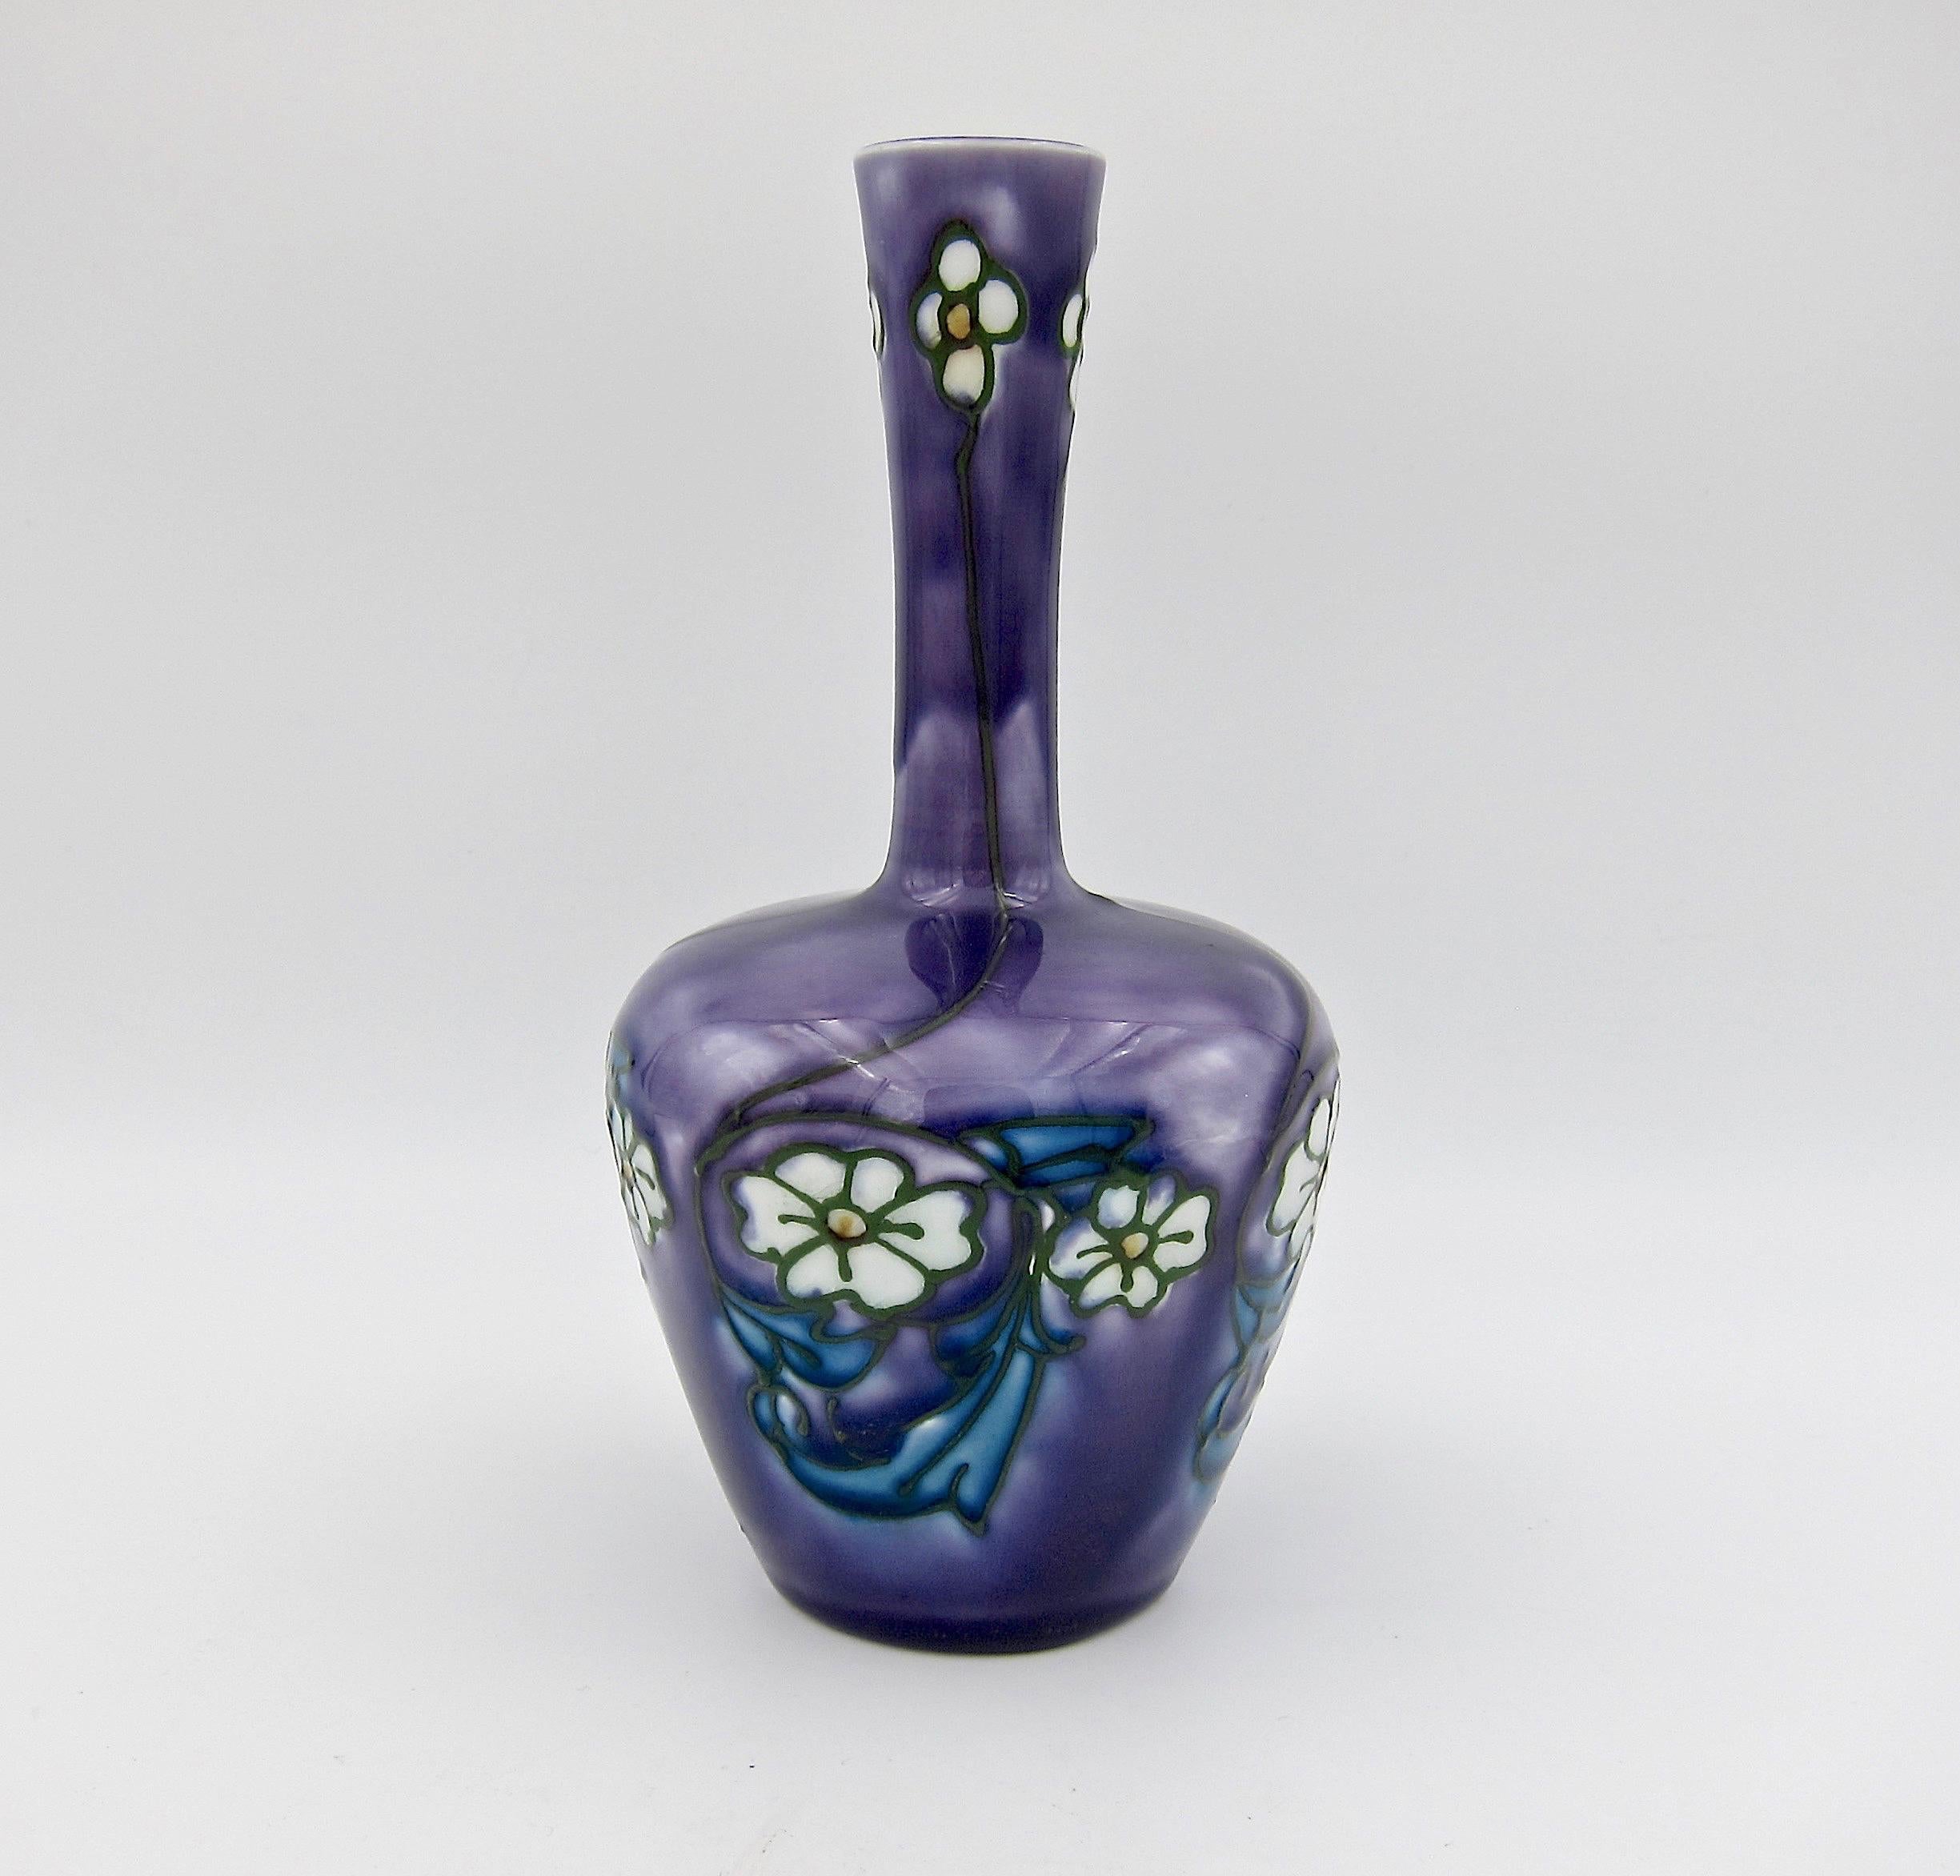 A Minton secessionist ware vase made circa 1910 at Stoke-on-Trent in Staffordshire, England. Mintons produced these designs by Léon V. Solon (1873-1957) and John W. Wadsworth (1879-1955) from circa 1901 through 1920.

This art pottery bottle form